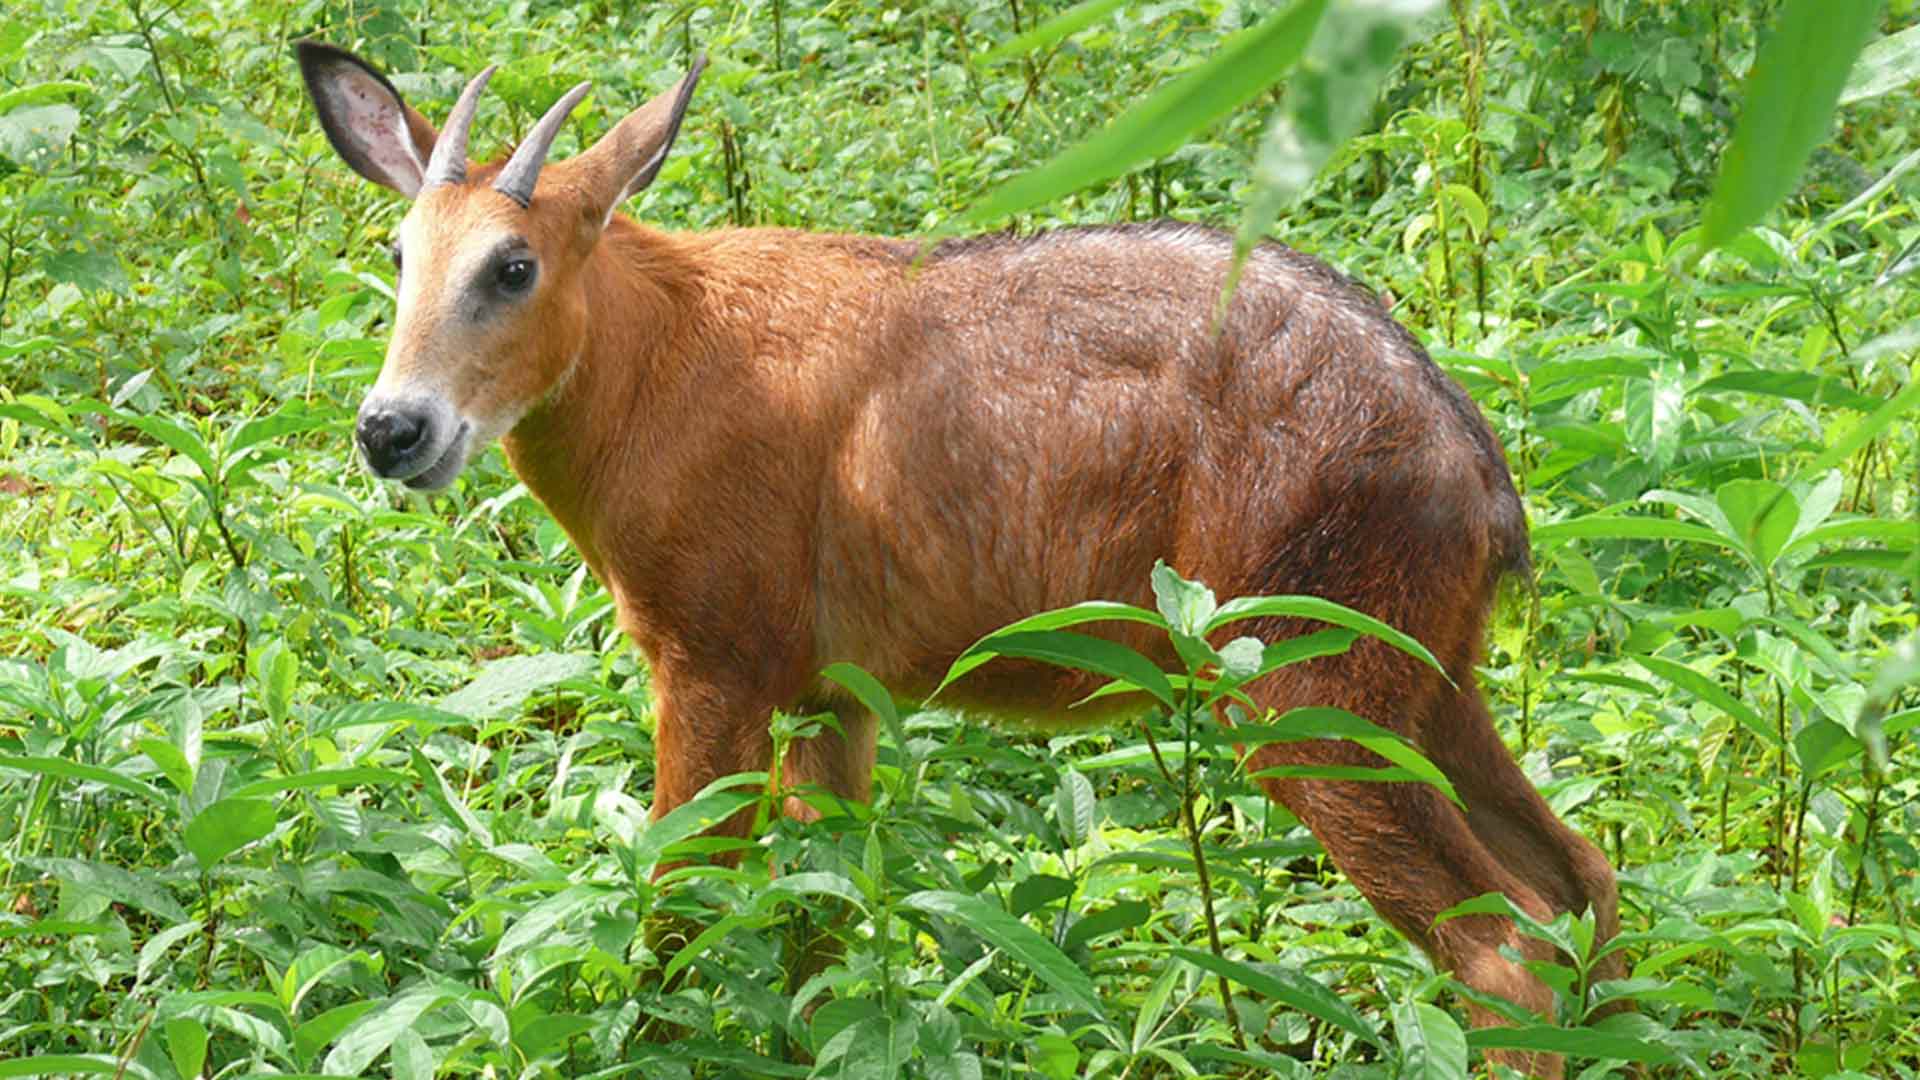 Wild forest goats need protection